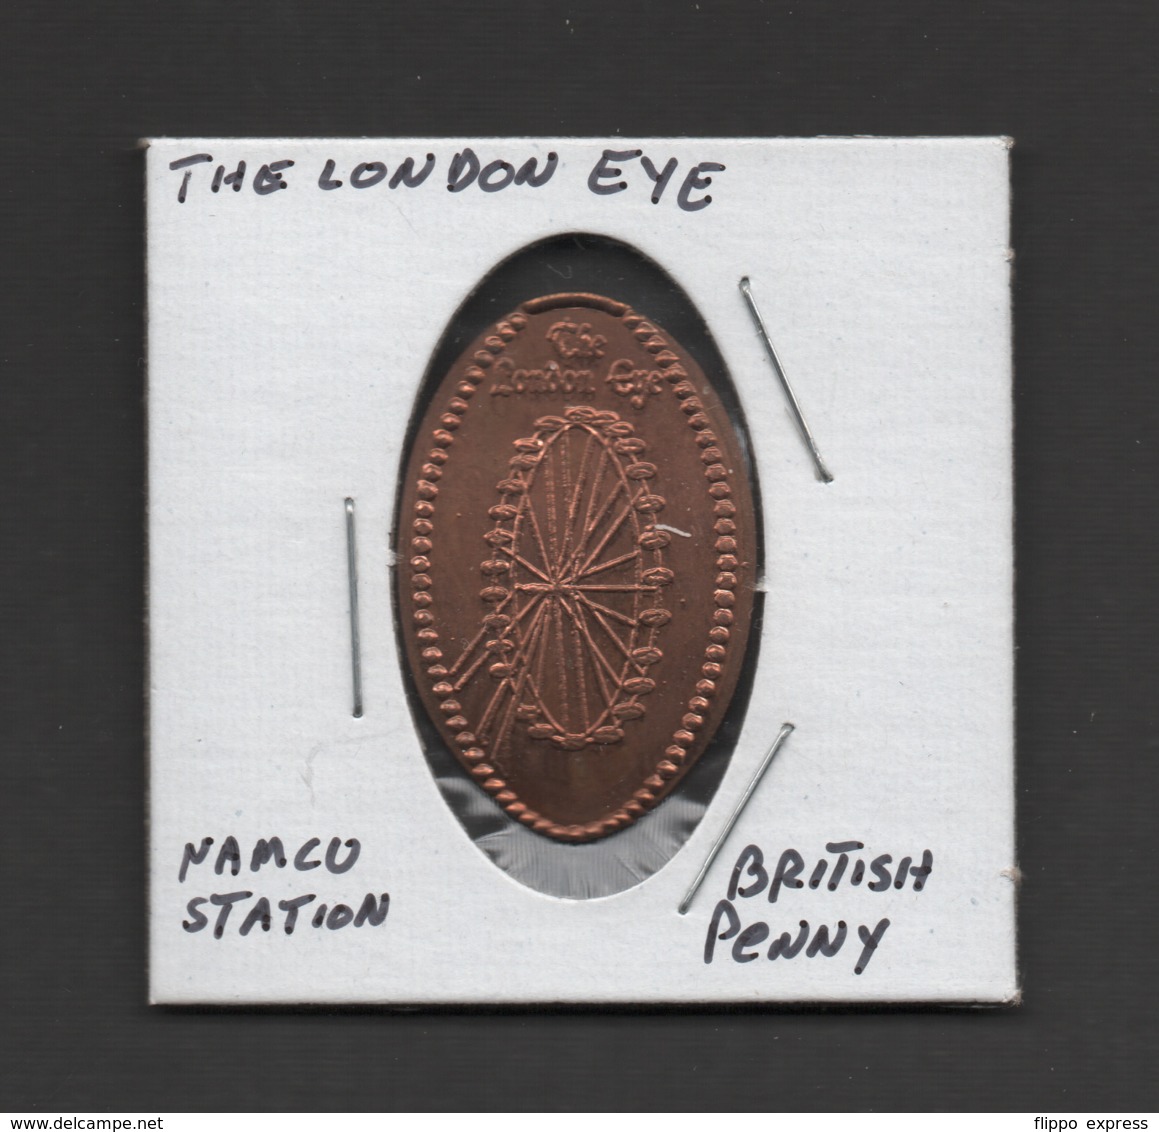 Pressed Penny, Elongated Coin, The London Eye, England - Monete Allungate (penny Souvenirs)